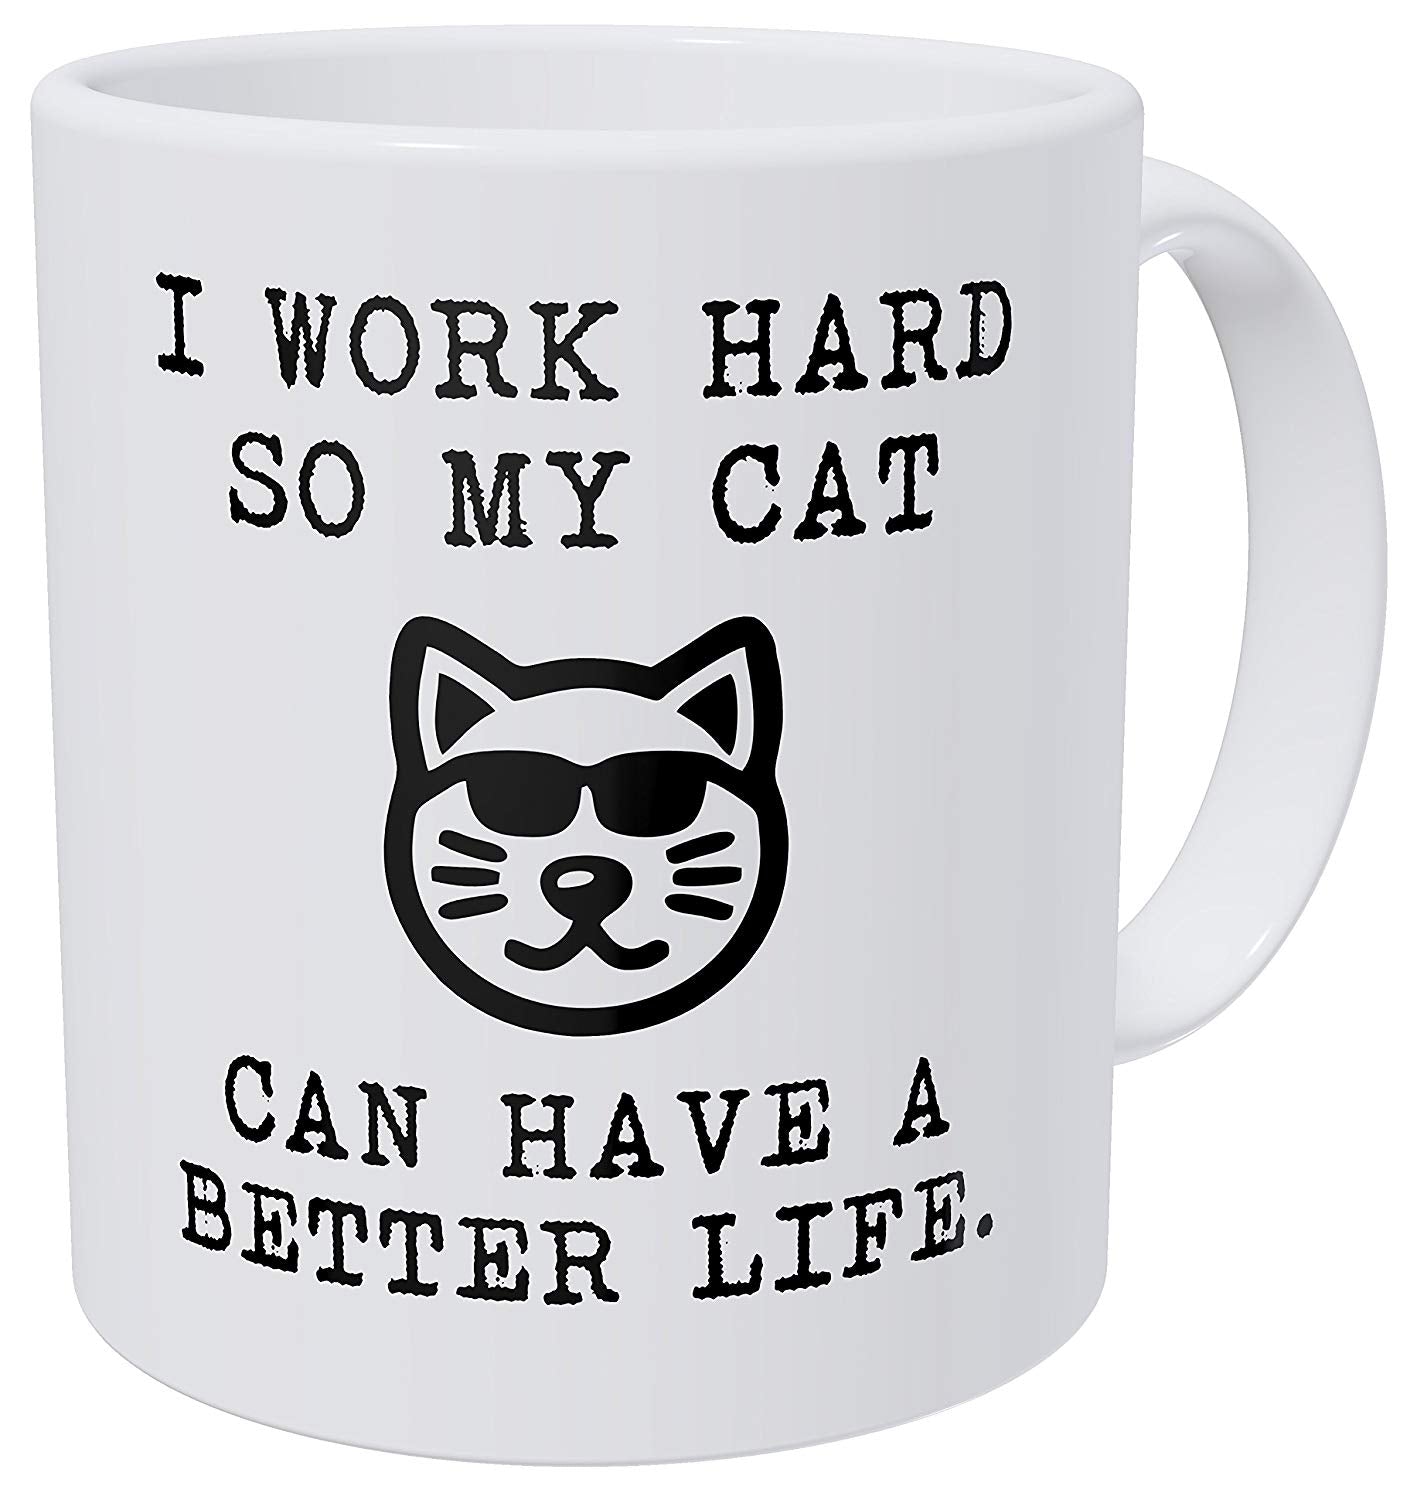 Aviento Funny Coffee Mug I Work Hard So My Cat Can Have A Better Life 11 Ounces 490 Grams Ultra White AAA